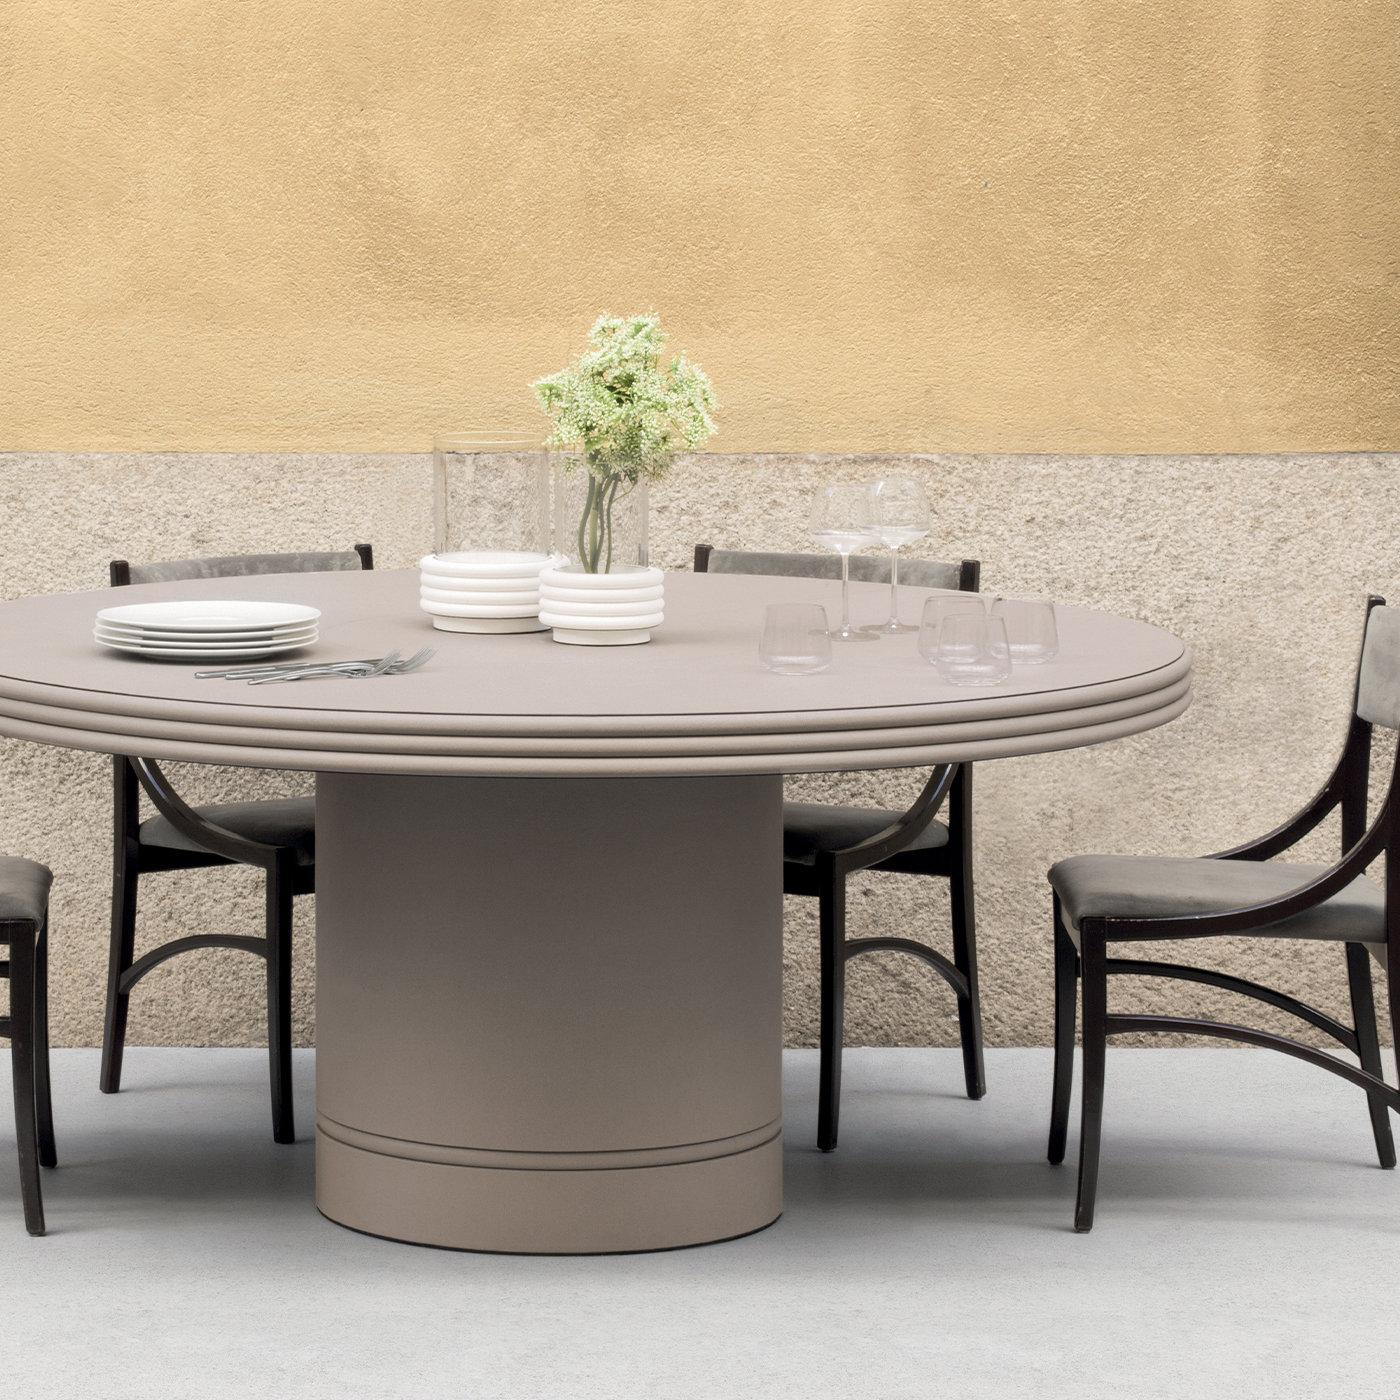 Contemporary leather round dining table - Scala by Stephane Parmentier for Giobagnara.
The object presented in the image has following finish: F06 Ivory Nappa Leather.

Entirely covered in ivory nappa leather, this imposing dining table is part